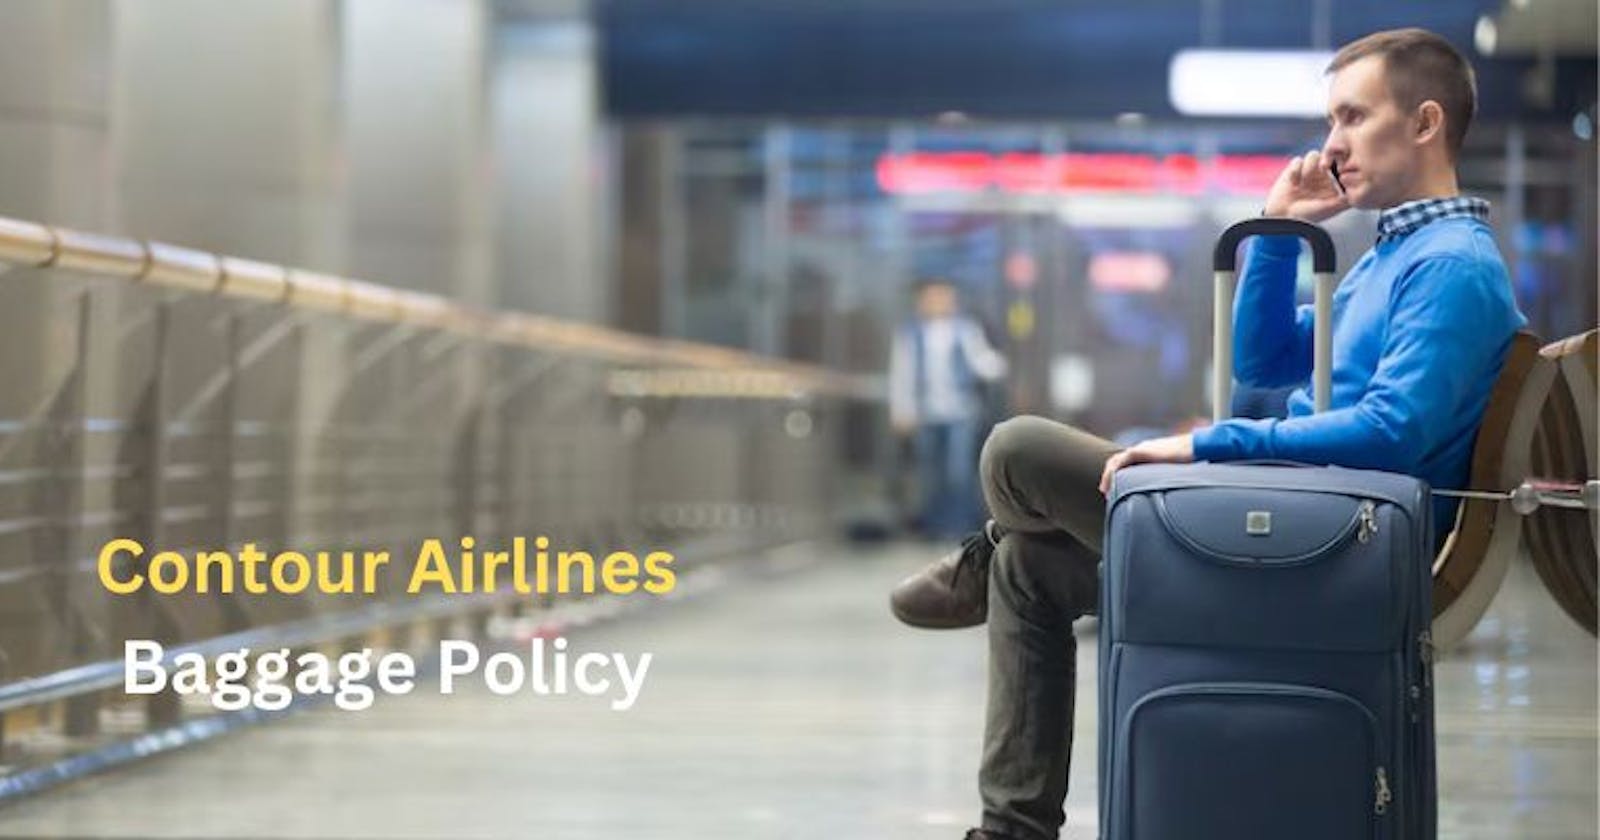 Explore the Contour Airlines Baggage Policy